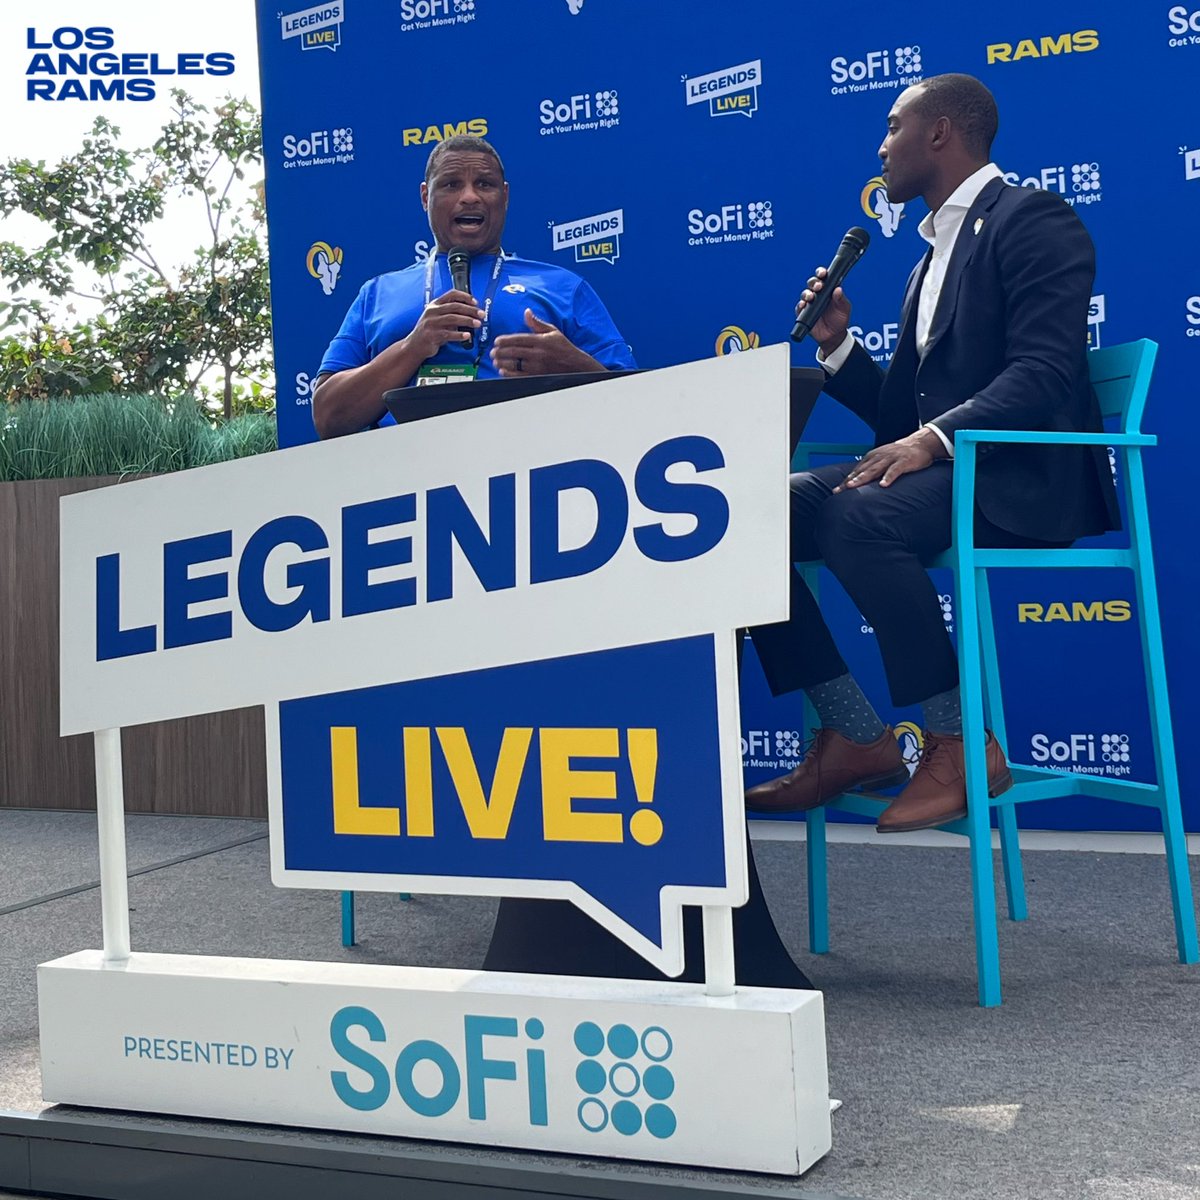 .@DMarcoFarr1 joining us at the #RamsHouse! 

Legends Live presented by @SoFi.